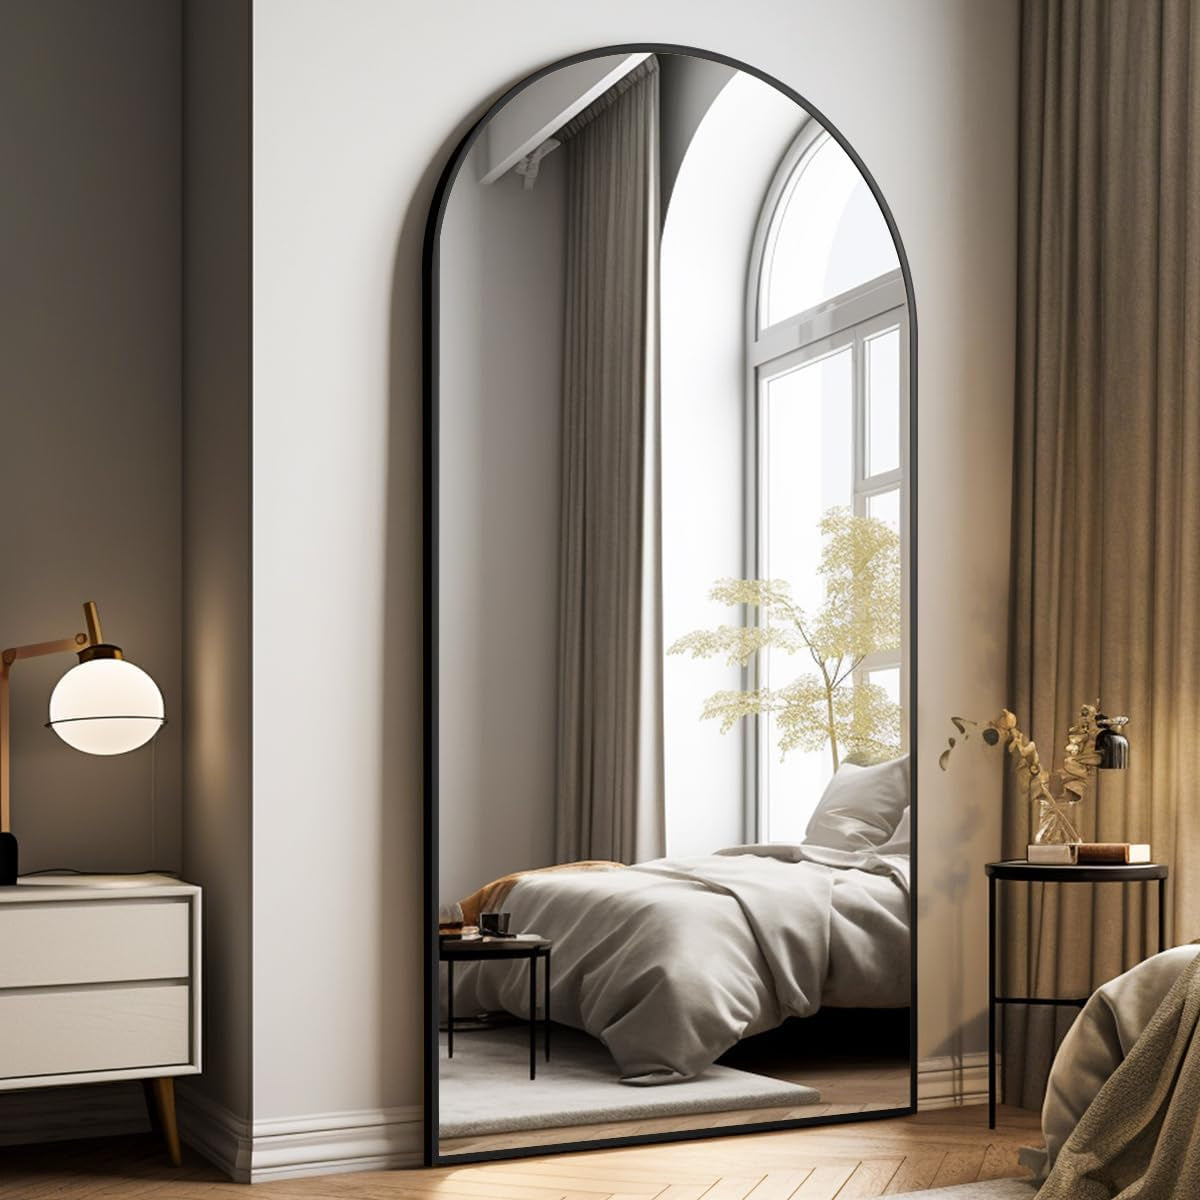 Oversized Full-Body Mirror, 76" X 34" Arched Full-Length Mirror, Black Metal Frame, Floor Mirror for Bedroom, Living/Dressing Room, Gym - Stand/Wall Mounted/Leaning Mirror - Design By Technique